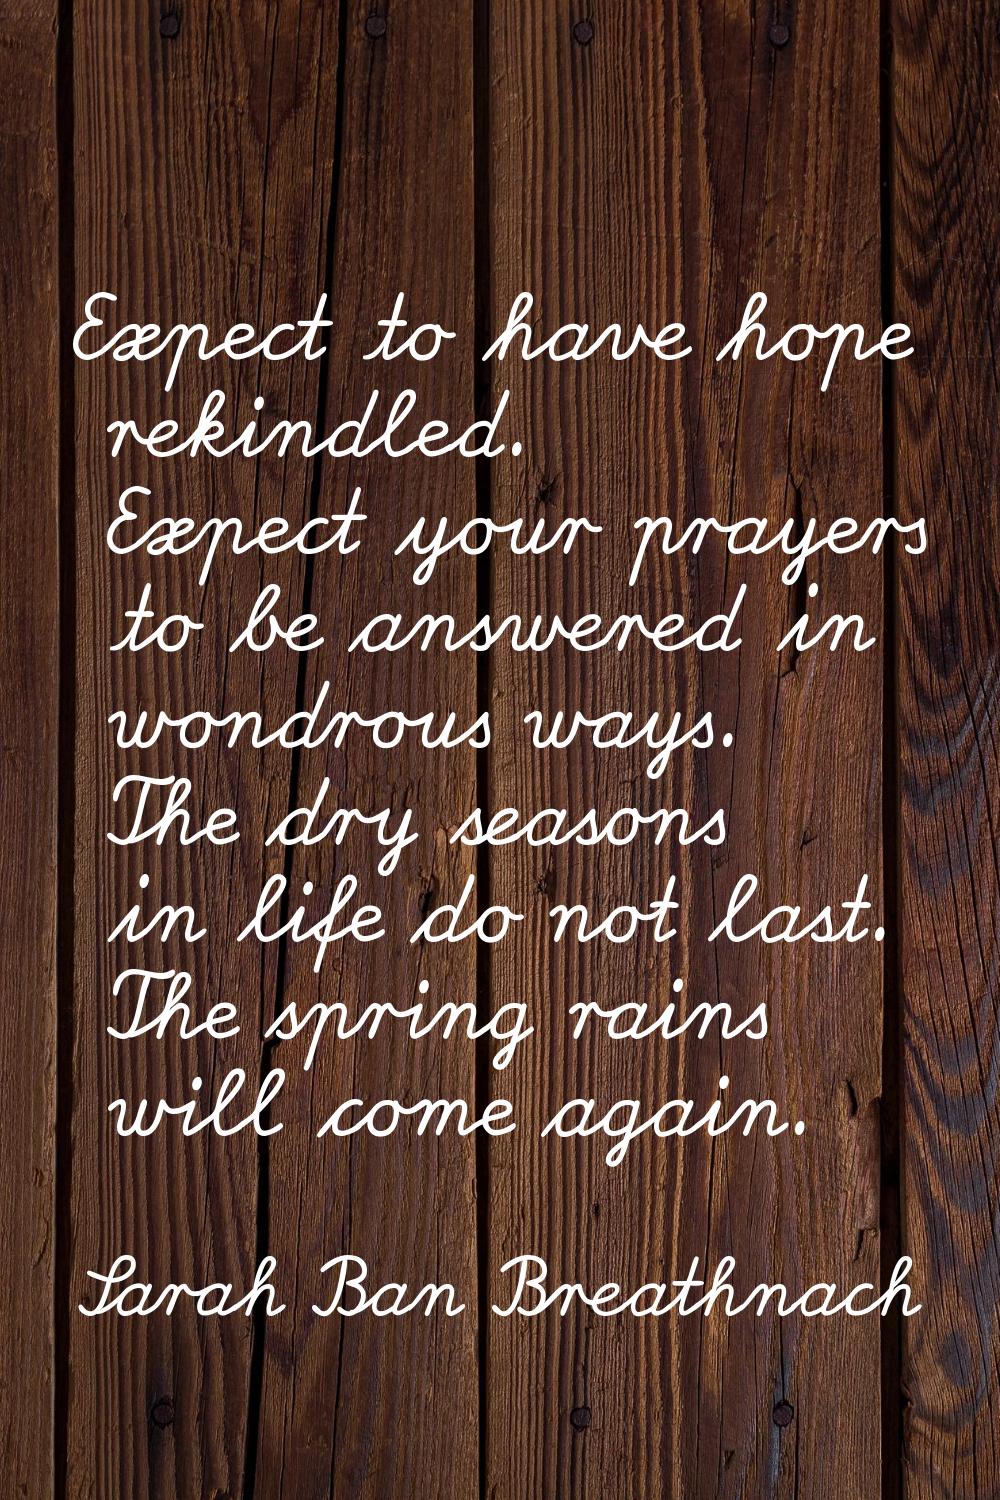 Expect to have hope rekindled. Expect your prayers to be answered in wondrous ways. The dry seasons